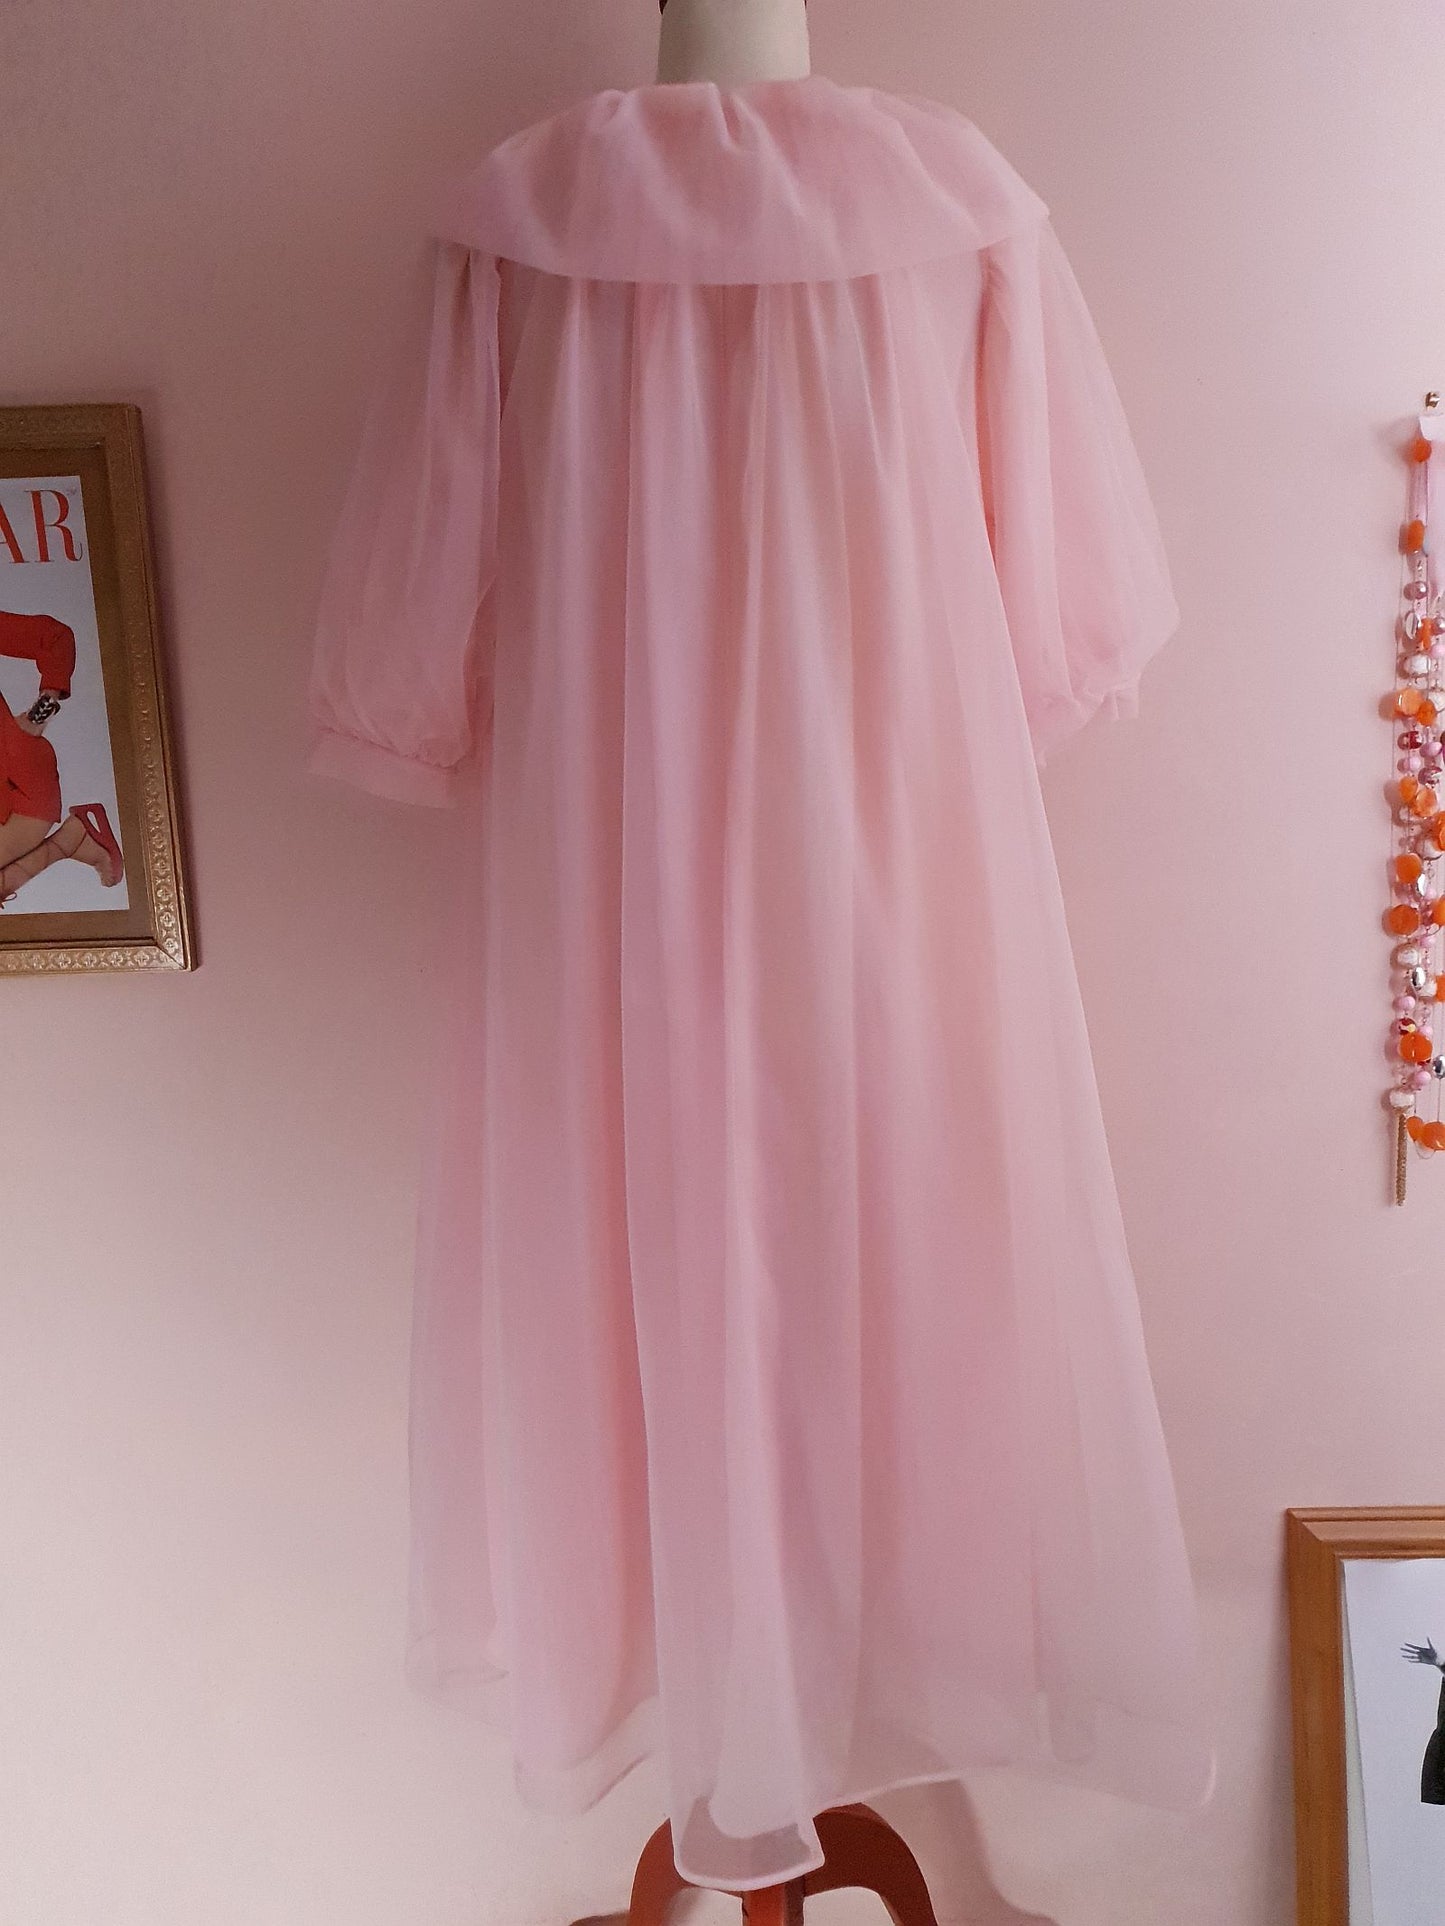 Boudoir Glamour 1960s Vintage Pale Pink Chiffon Dressing Gown Robe